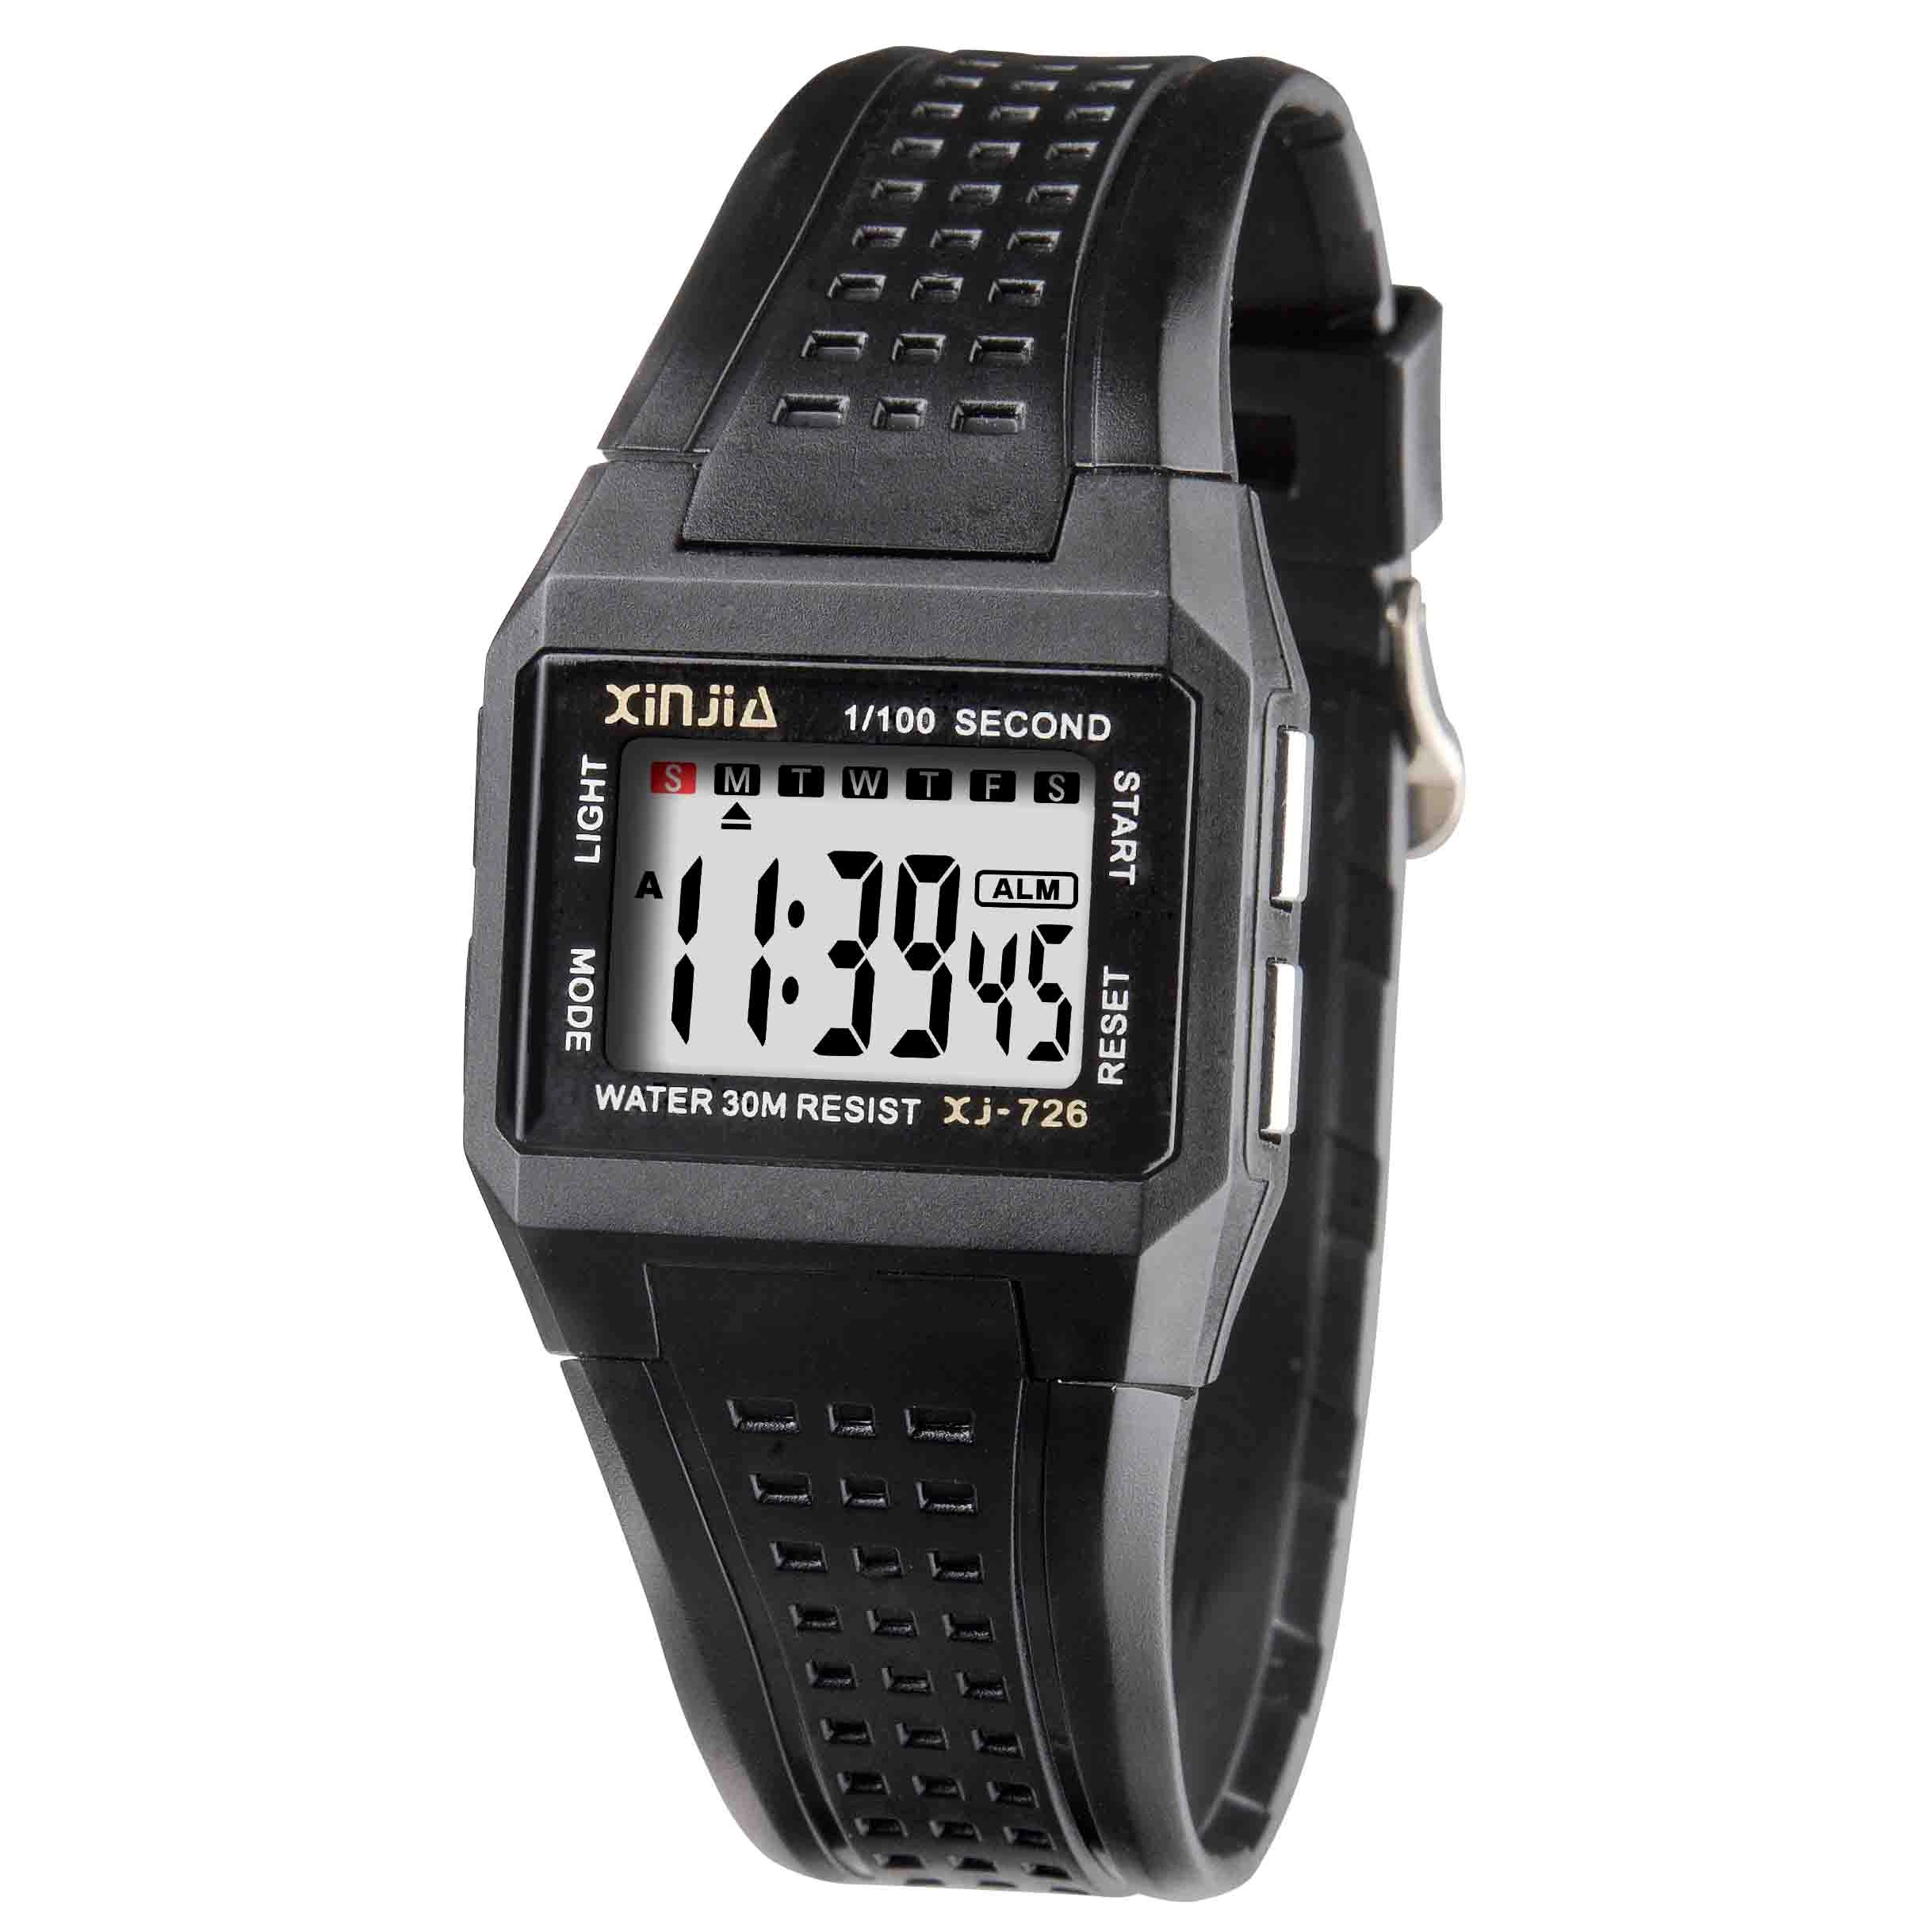 Small Square Child Digital Water Resistant Wrist Watch